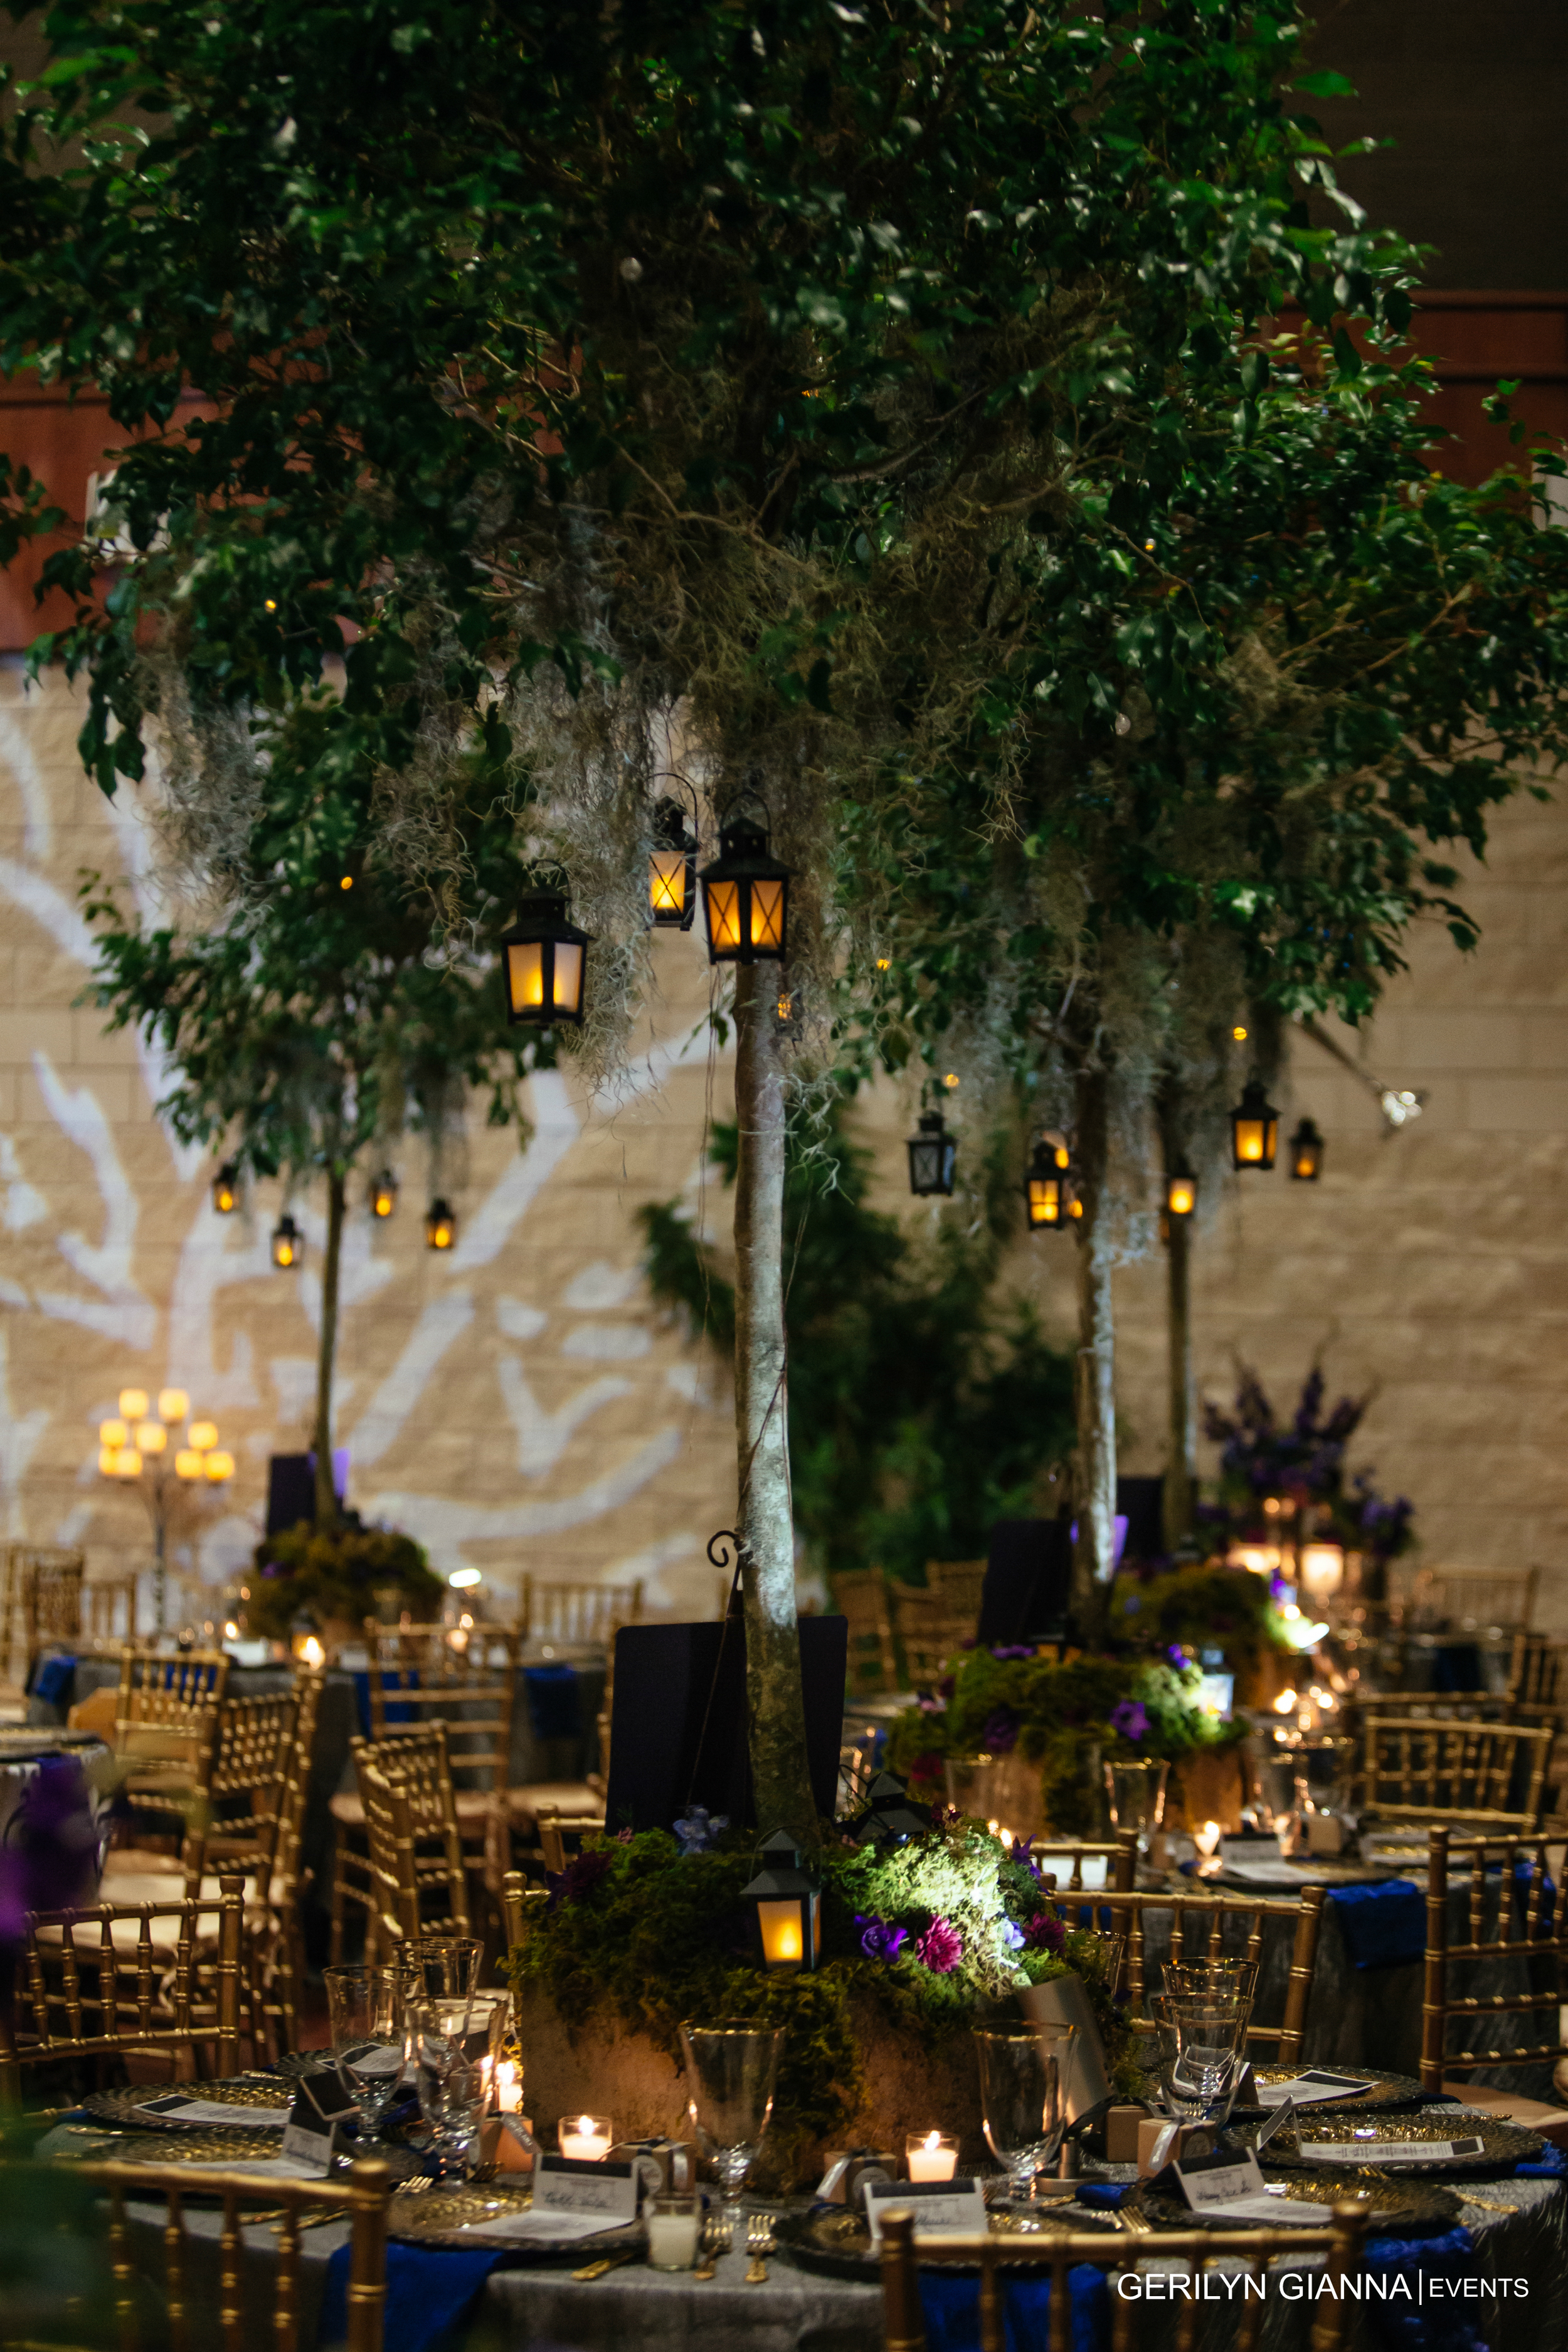 Gerilyn Gianna Event and Floral Design | Wedding at The Borland Center for Performing Arts | Medieval Wedding Theme | Robert Madrid Photography